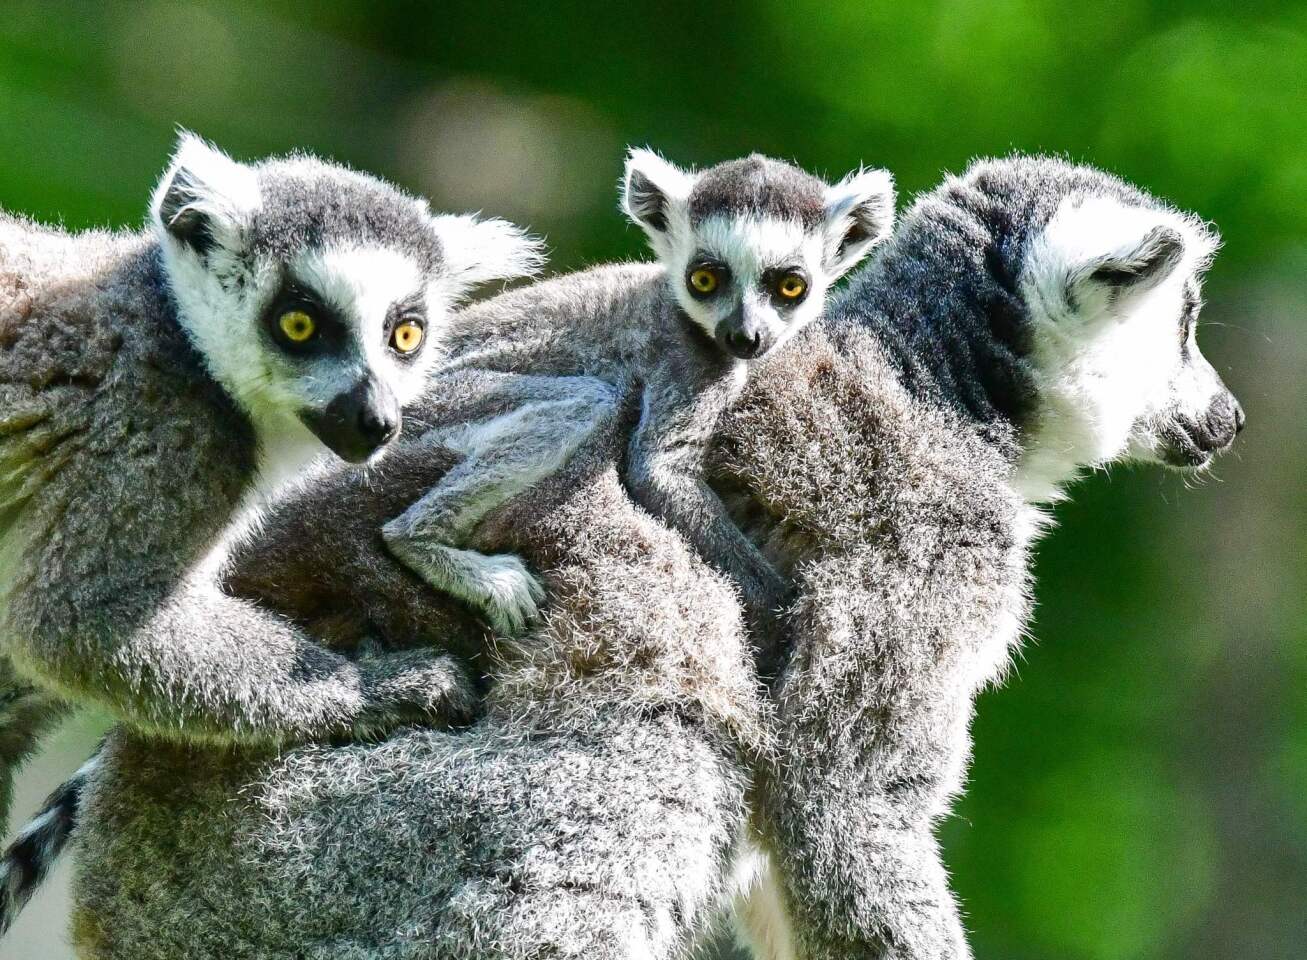 Ring-tailed lemur babies cling to their mother at the zoo in Cottbus, Germany, on May 11, 2016. Three ring-tailed lemurs were born at the zoo in recent weeks.